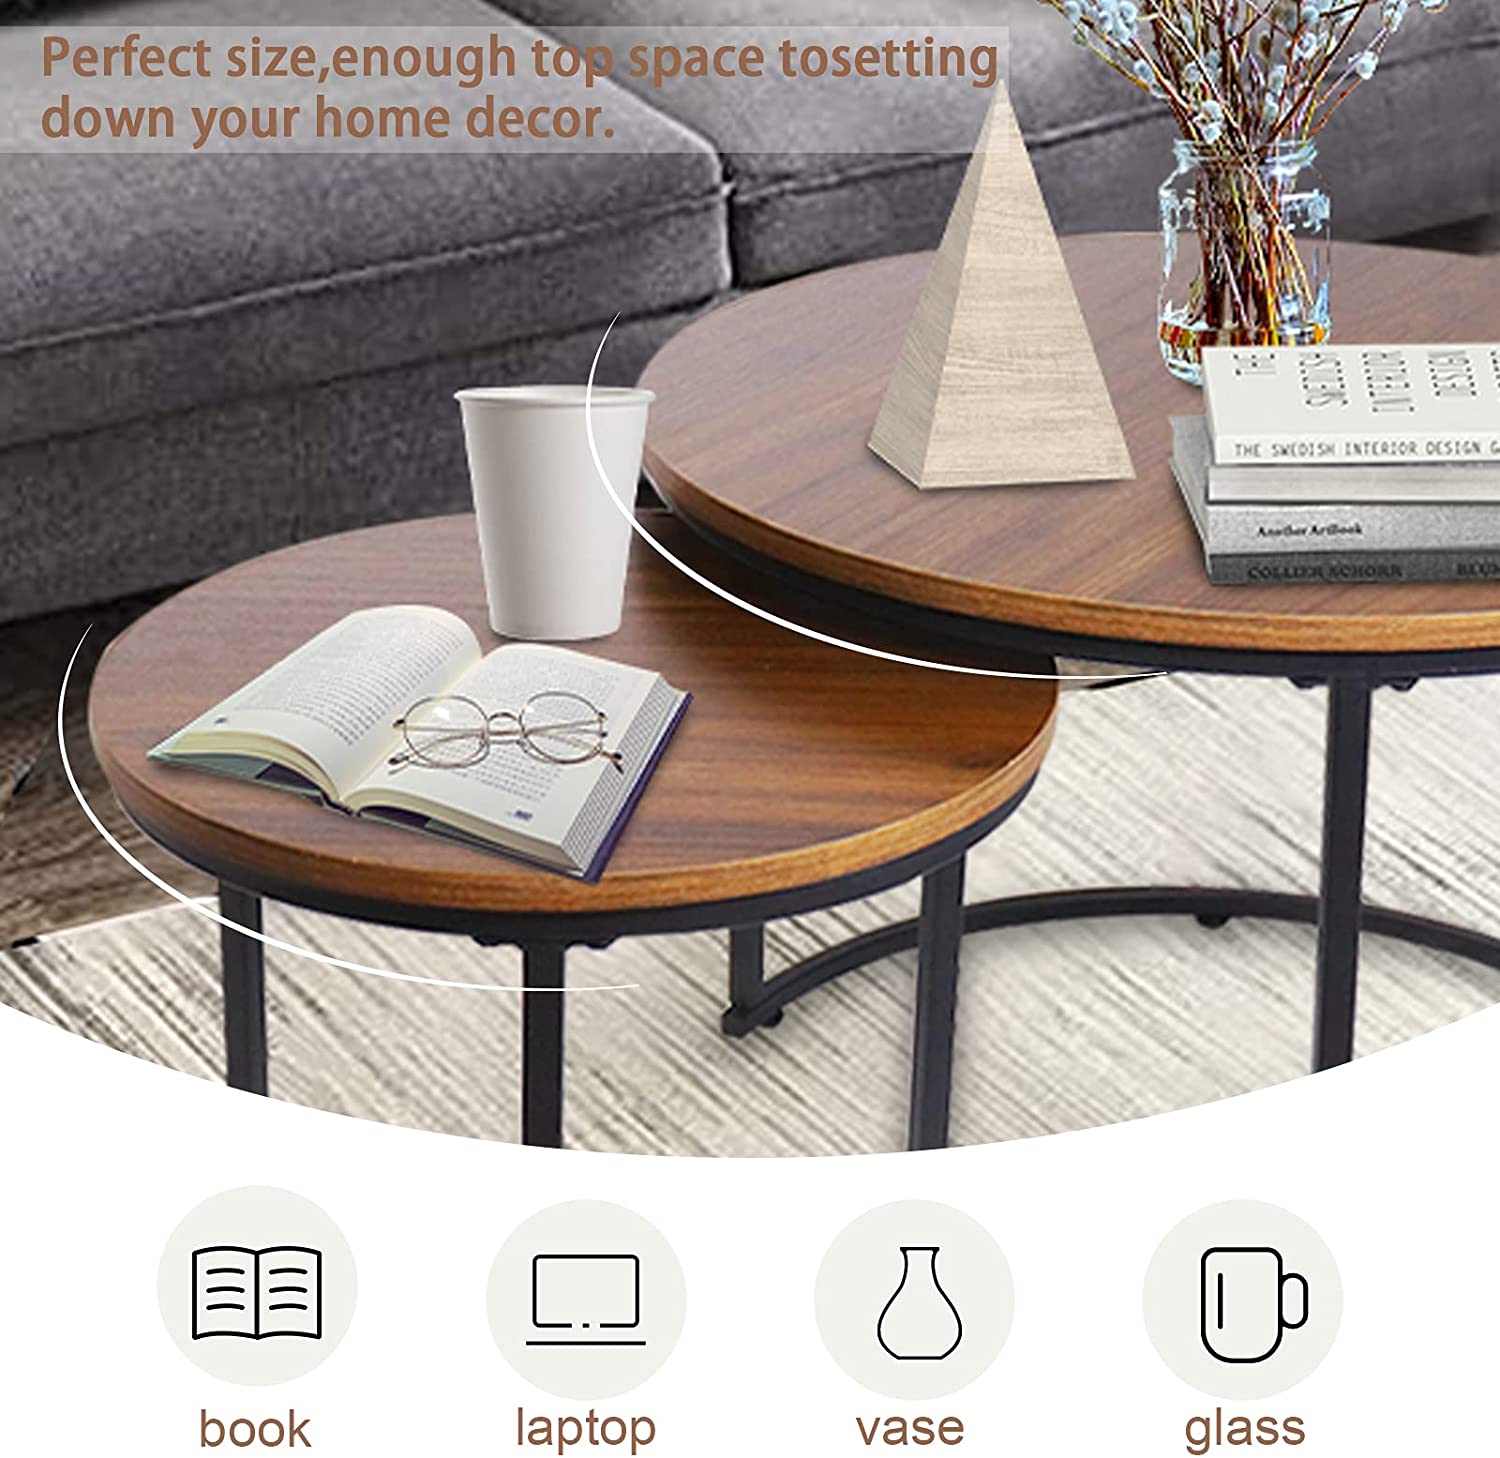 Nest Of Tables Set of 2 End Table Top Sturdy Metal Frame Wood Desk Centerpiece Living Room Bedroom Apartment Modern Industrial Simple